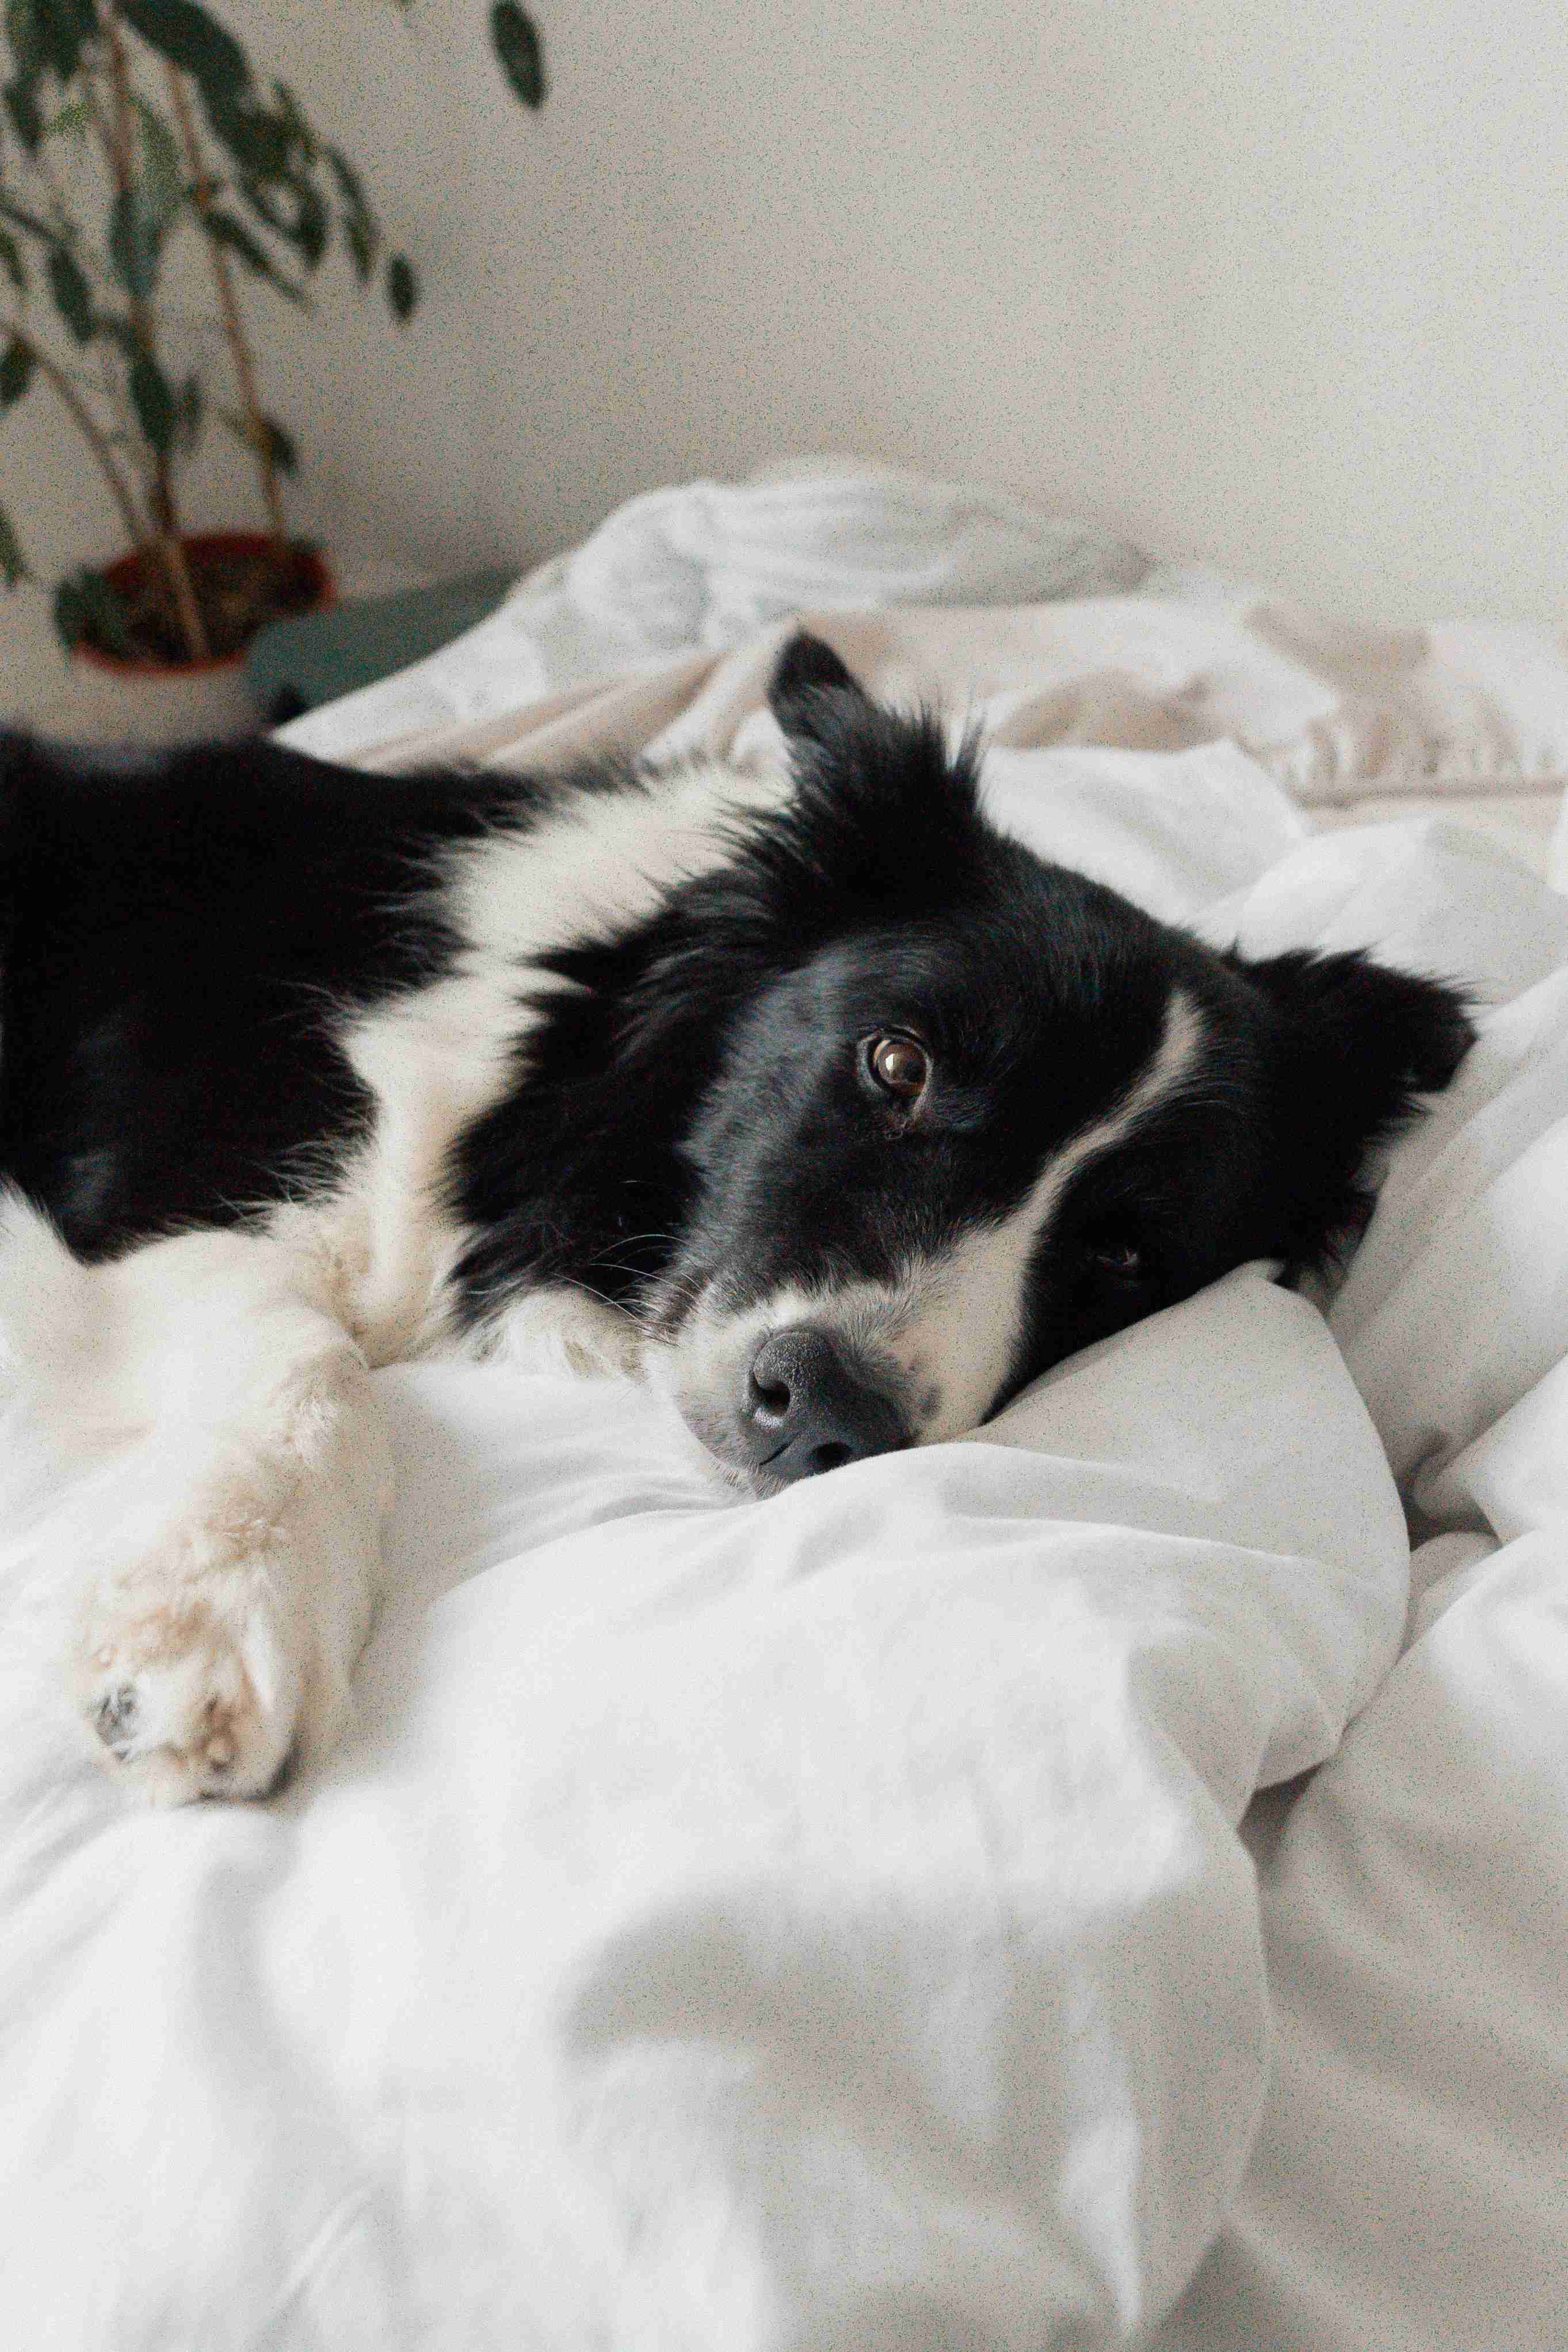 Is Your Border Collie Suffering from a Bladder Infection? Learn the Symptoms to Look Out For